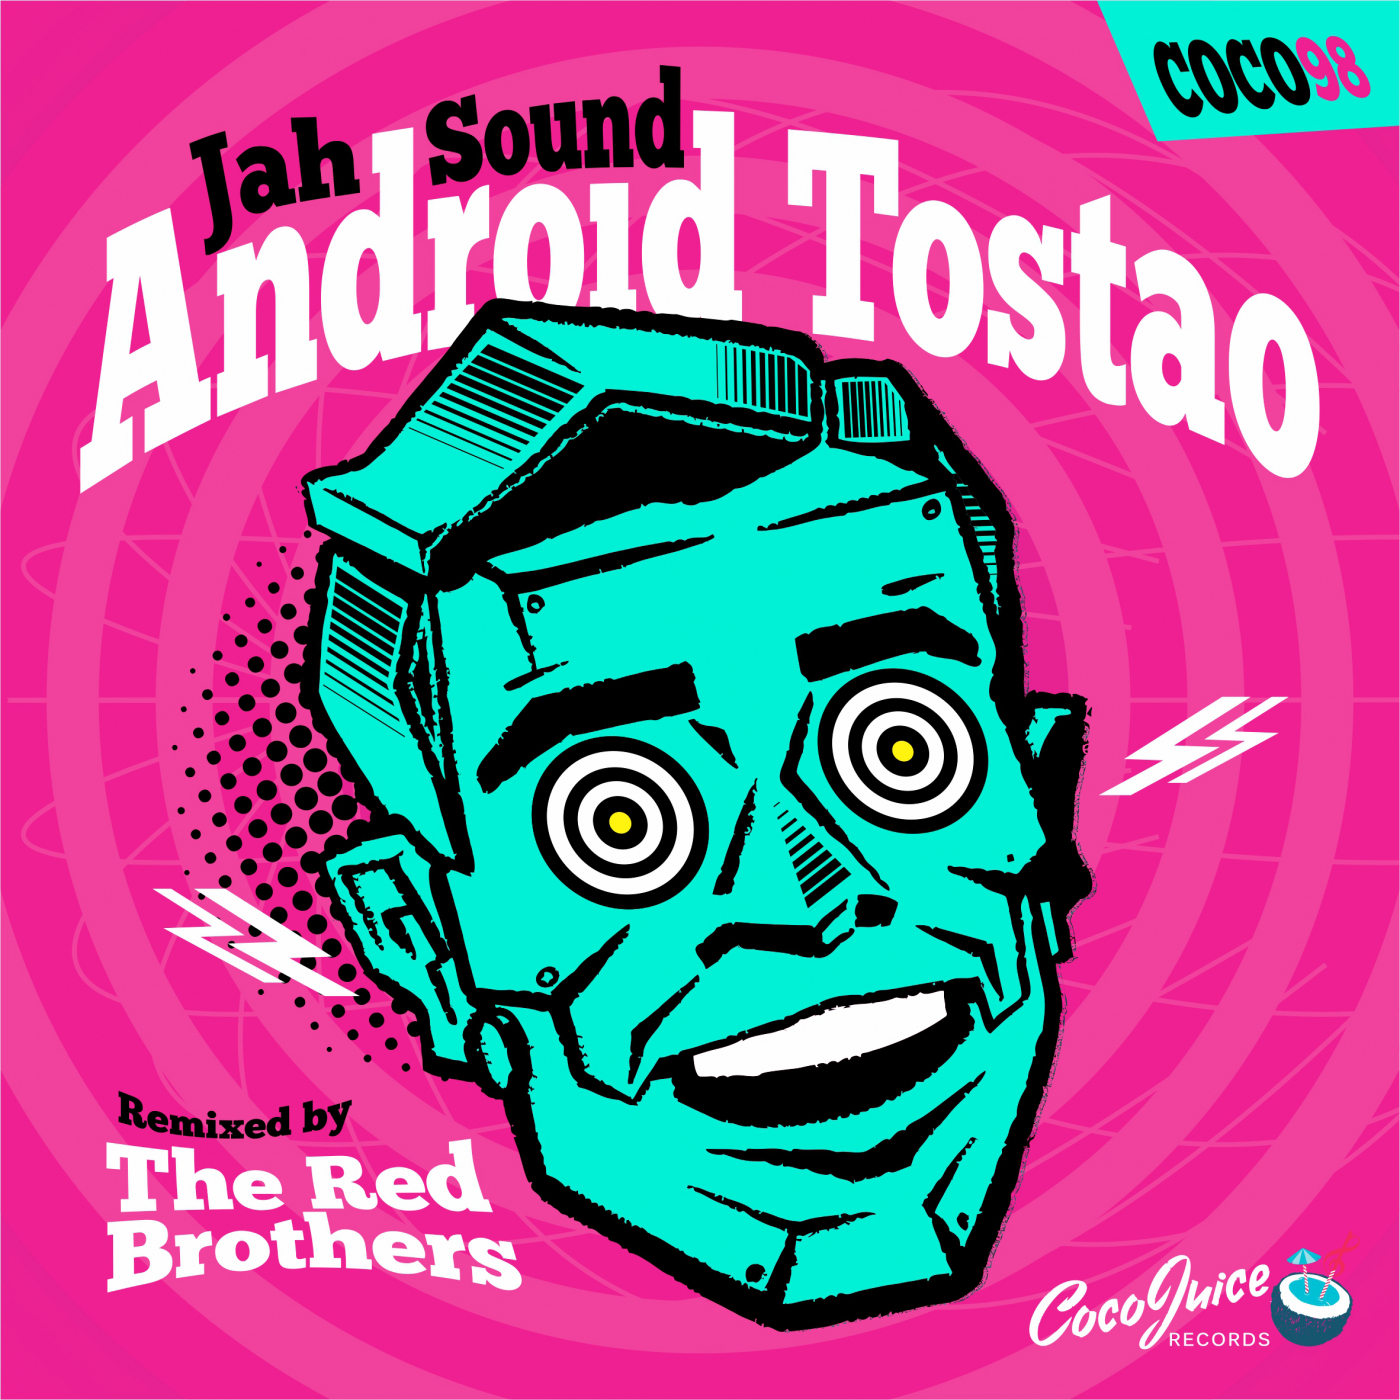 Red brothers. Jah Sound Android Tostao альбом. Jah Sound Android tostado альбом. Tostao Rosa.